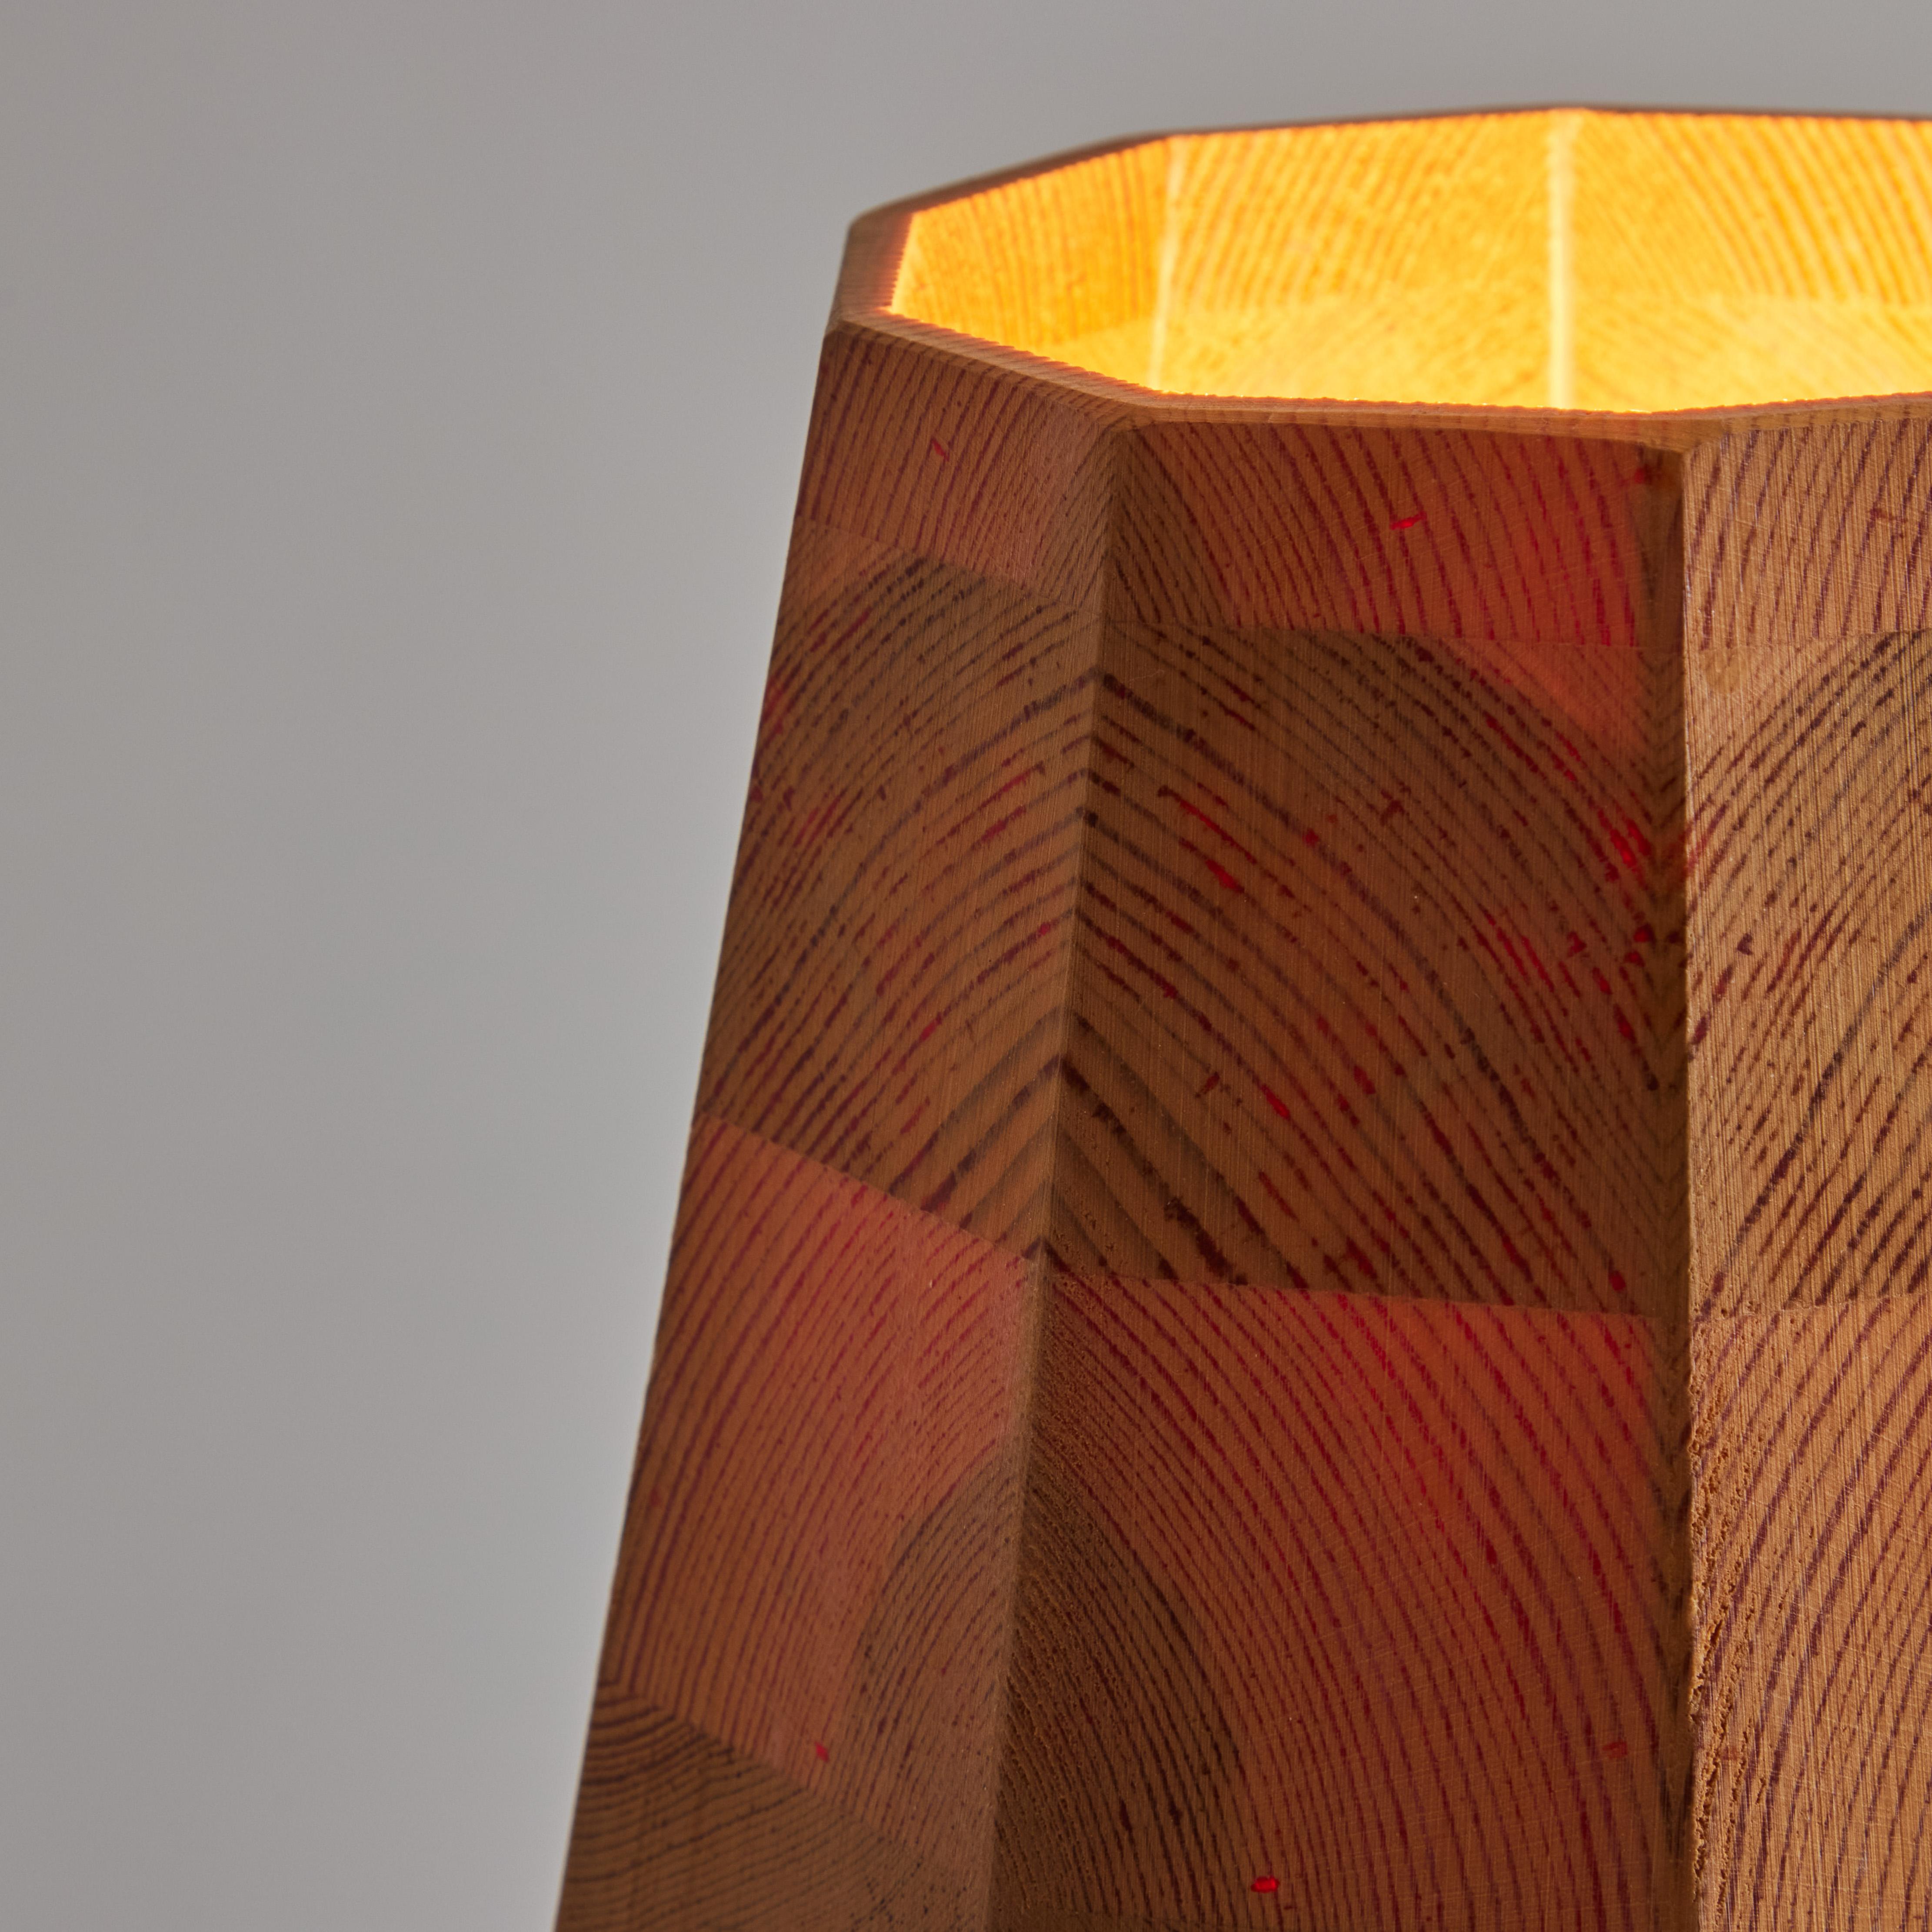 Pair of 1960s Wood Table Lamps Attributed to Hans-Agne Jakobsson for AB Ellysett For Sale 8